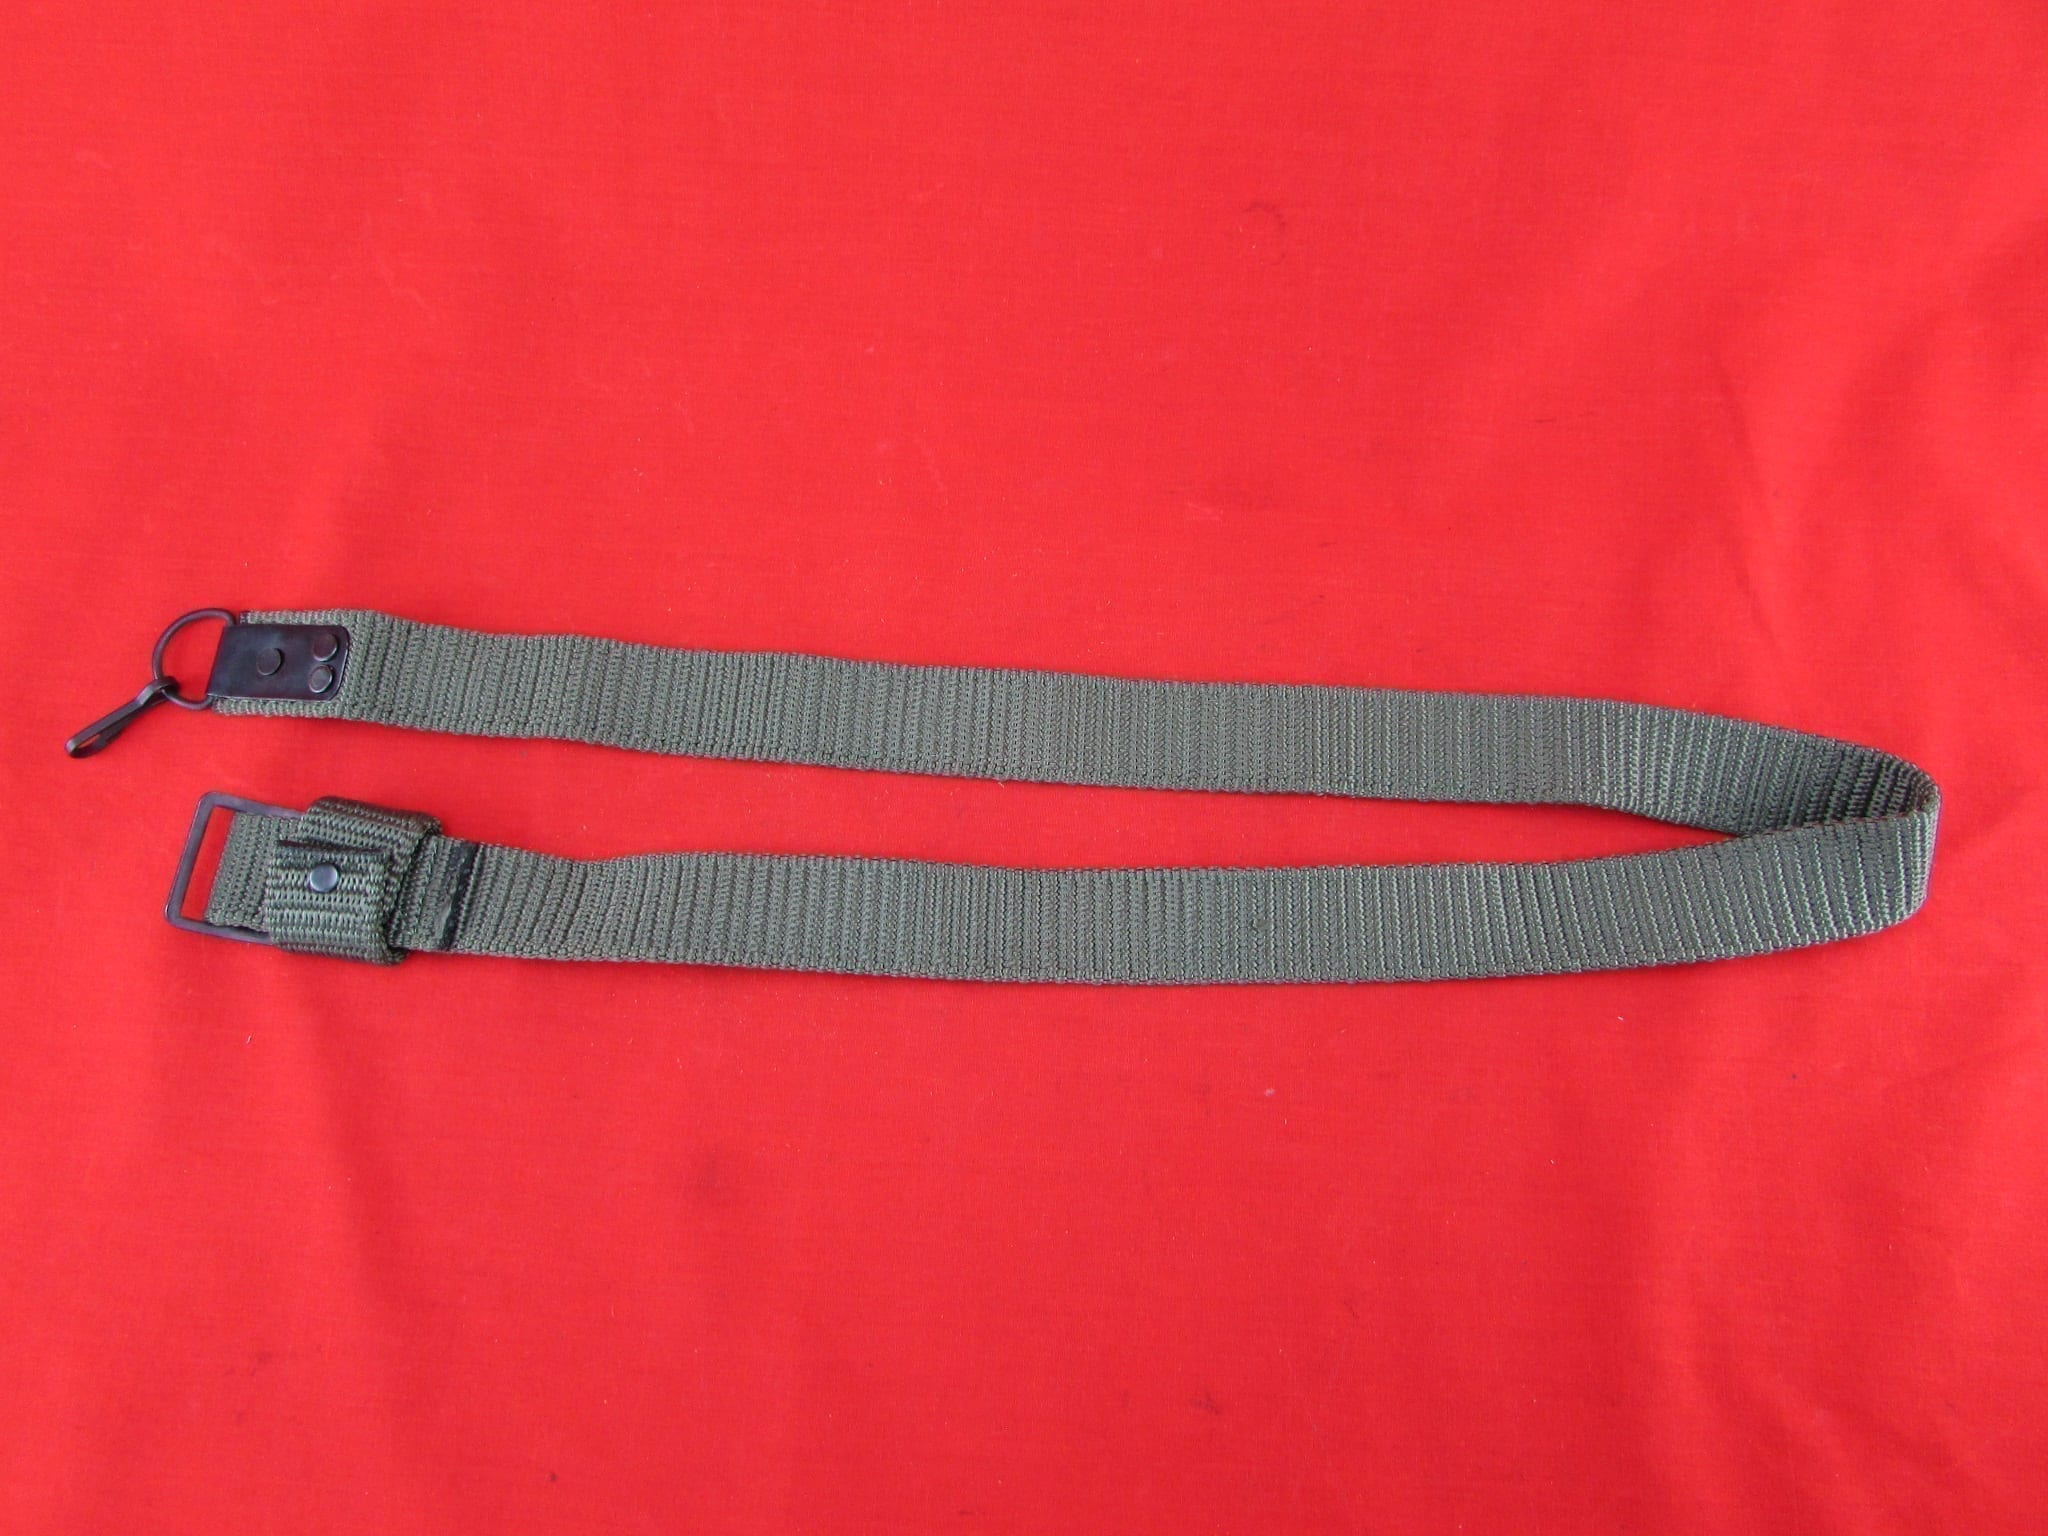 Romanian Green Nylon AK47 Sling | Midwest Military Collectibles